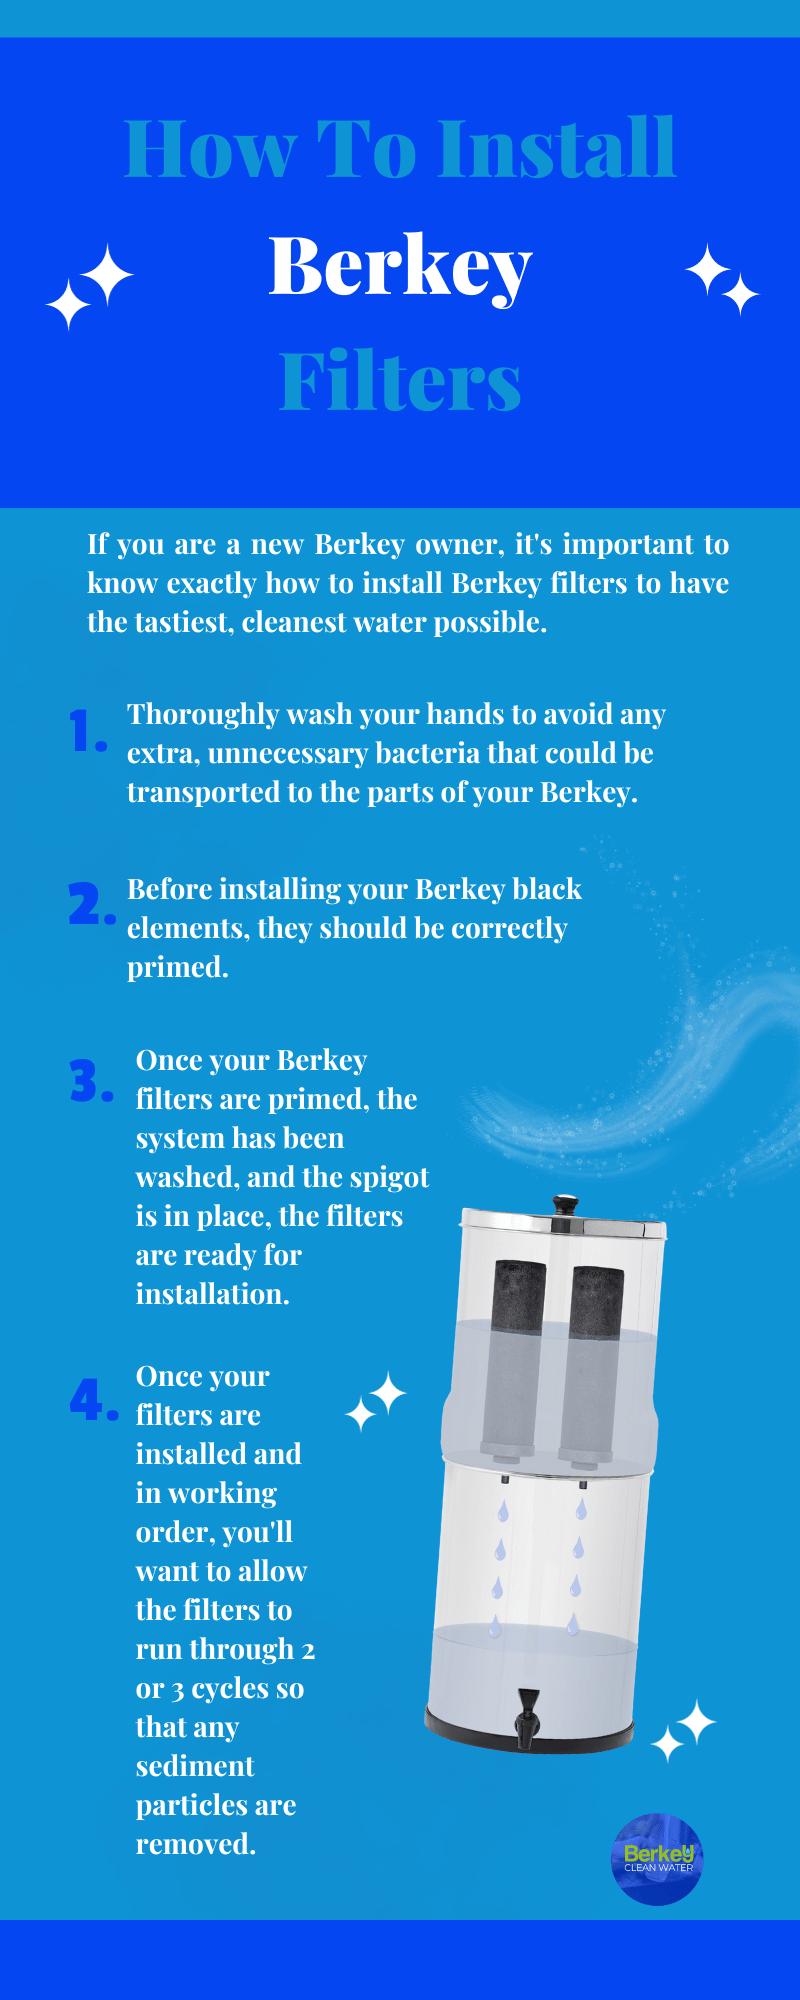 How To Install Berkey Filters Infographic